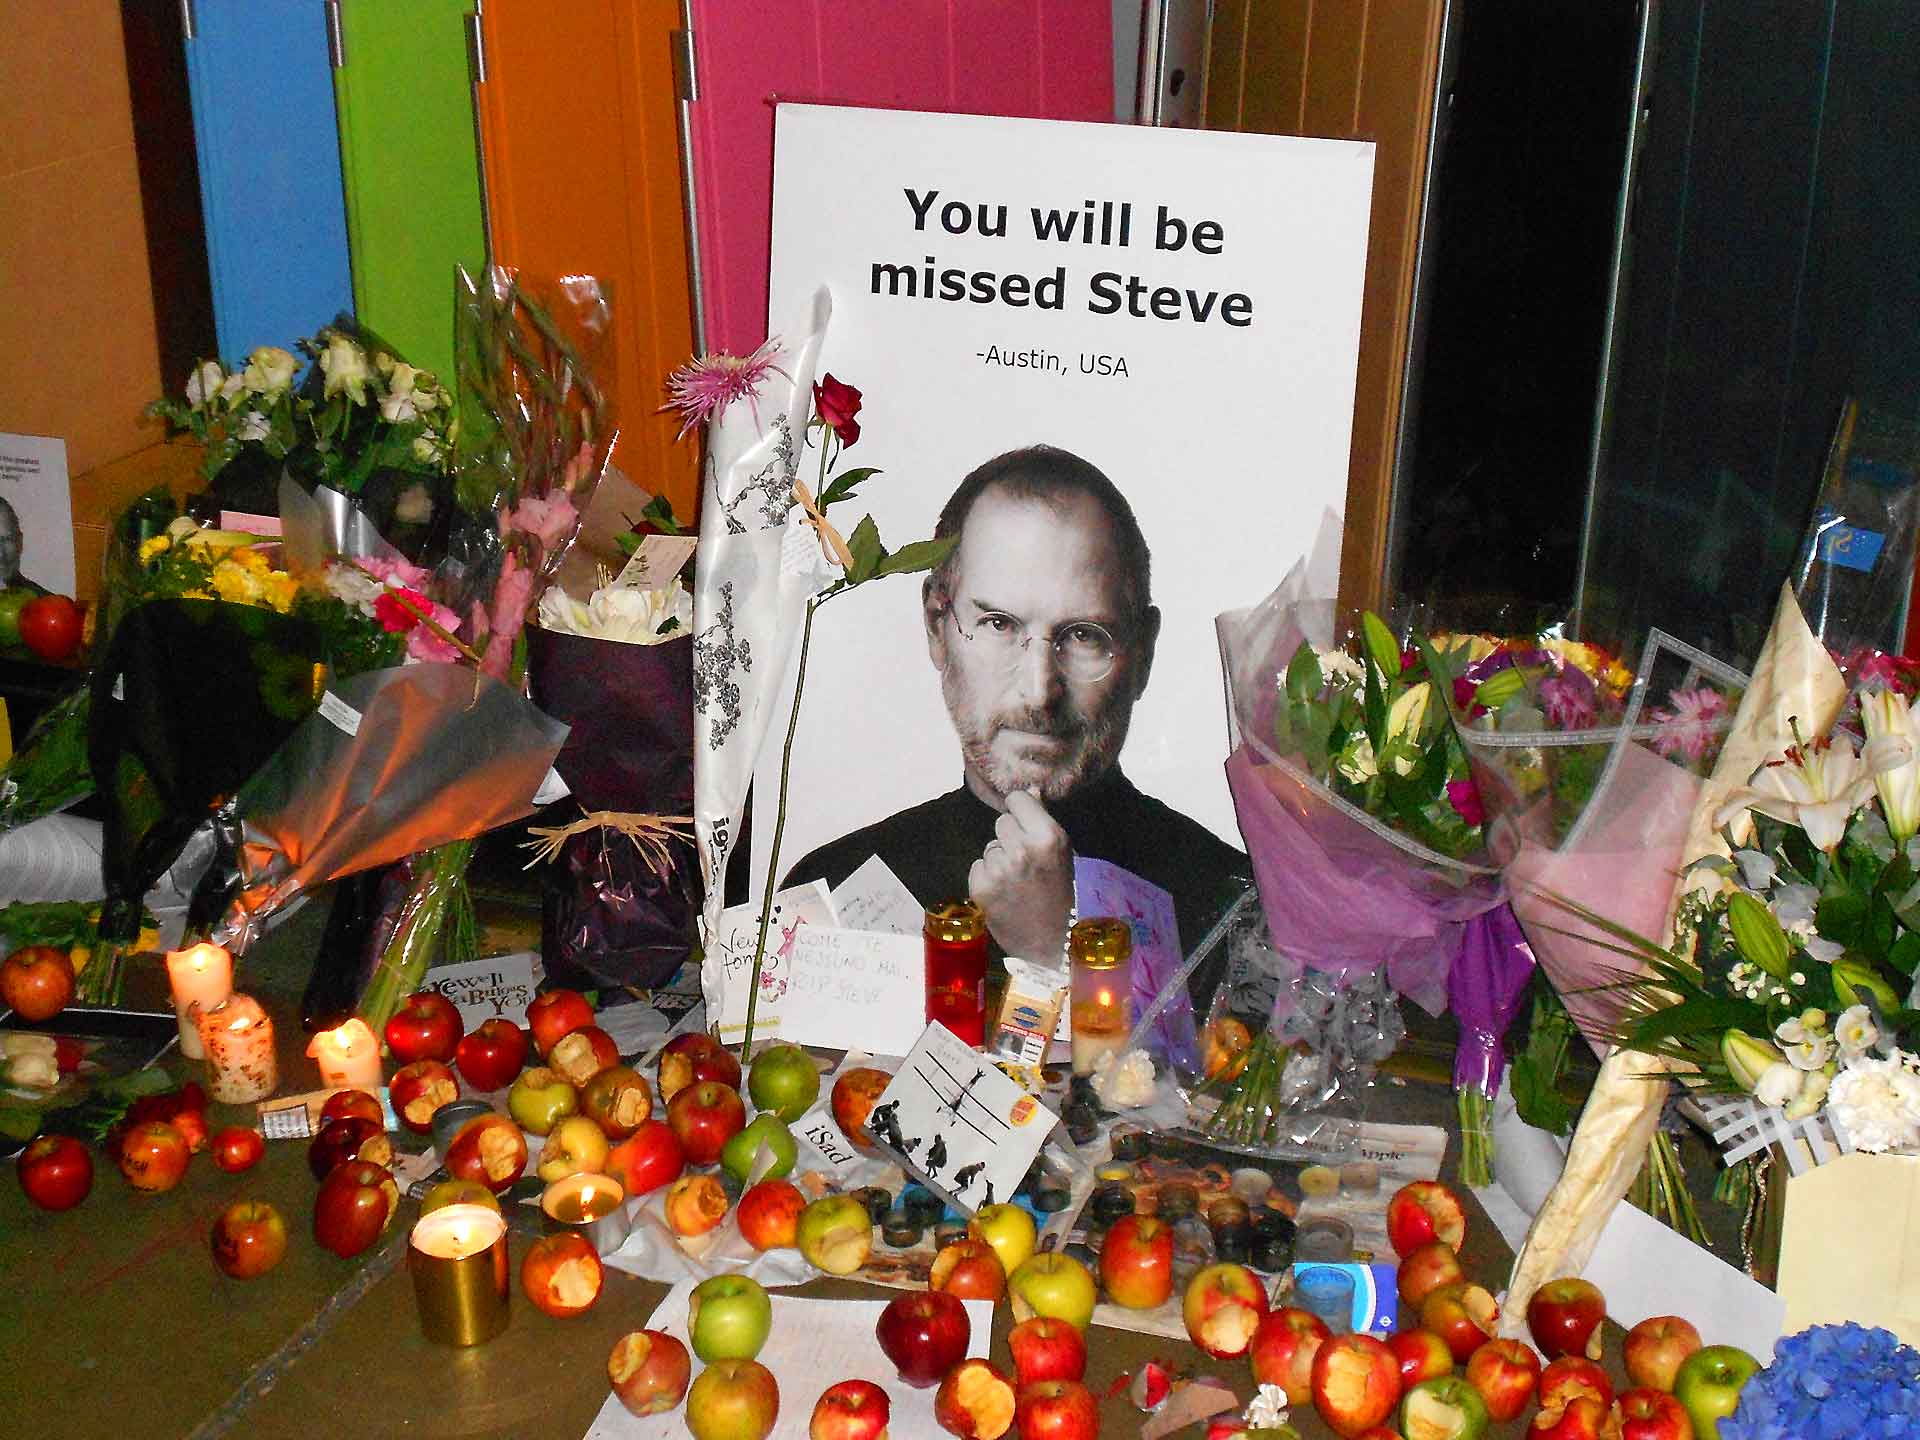 5 Things to Focus On Now that Steve Jobs is Gone